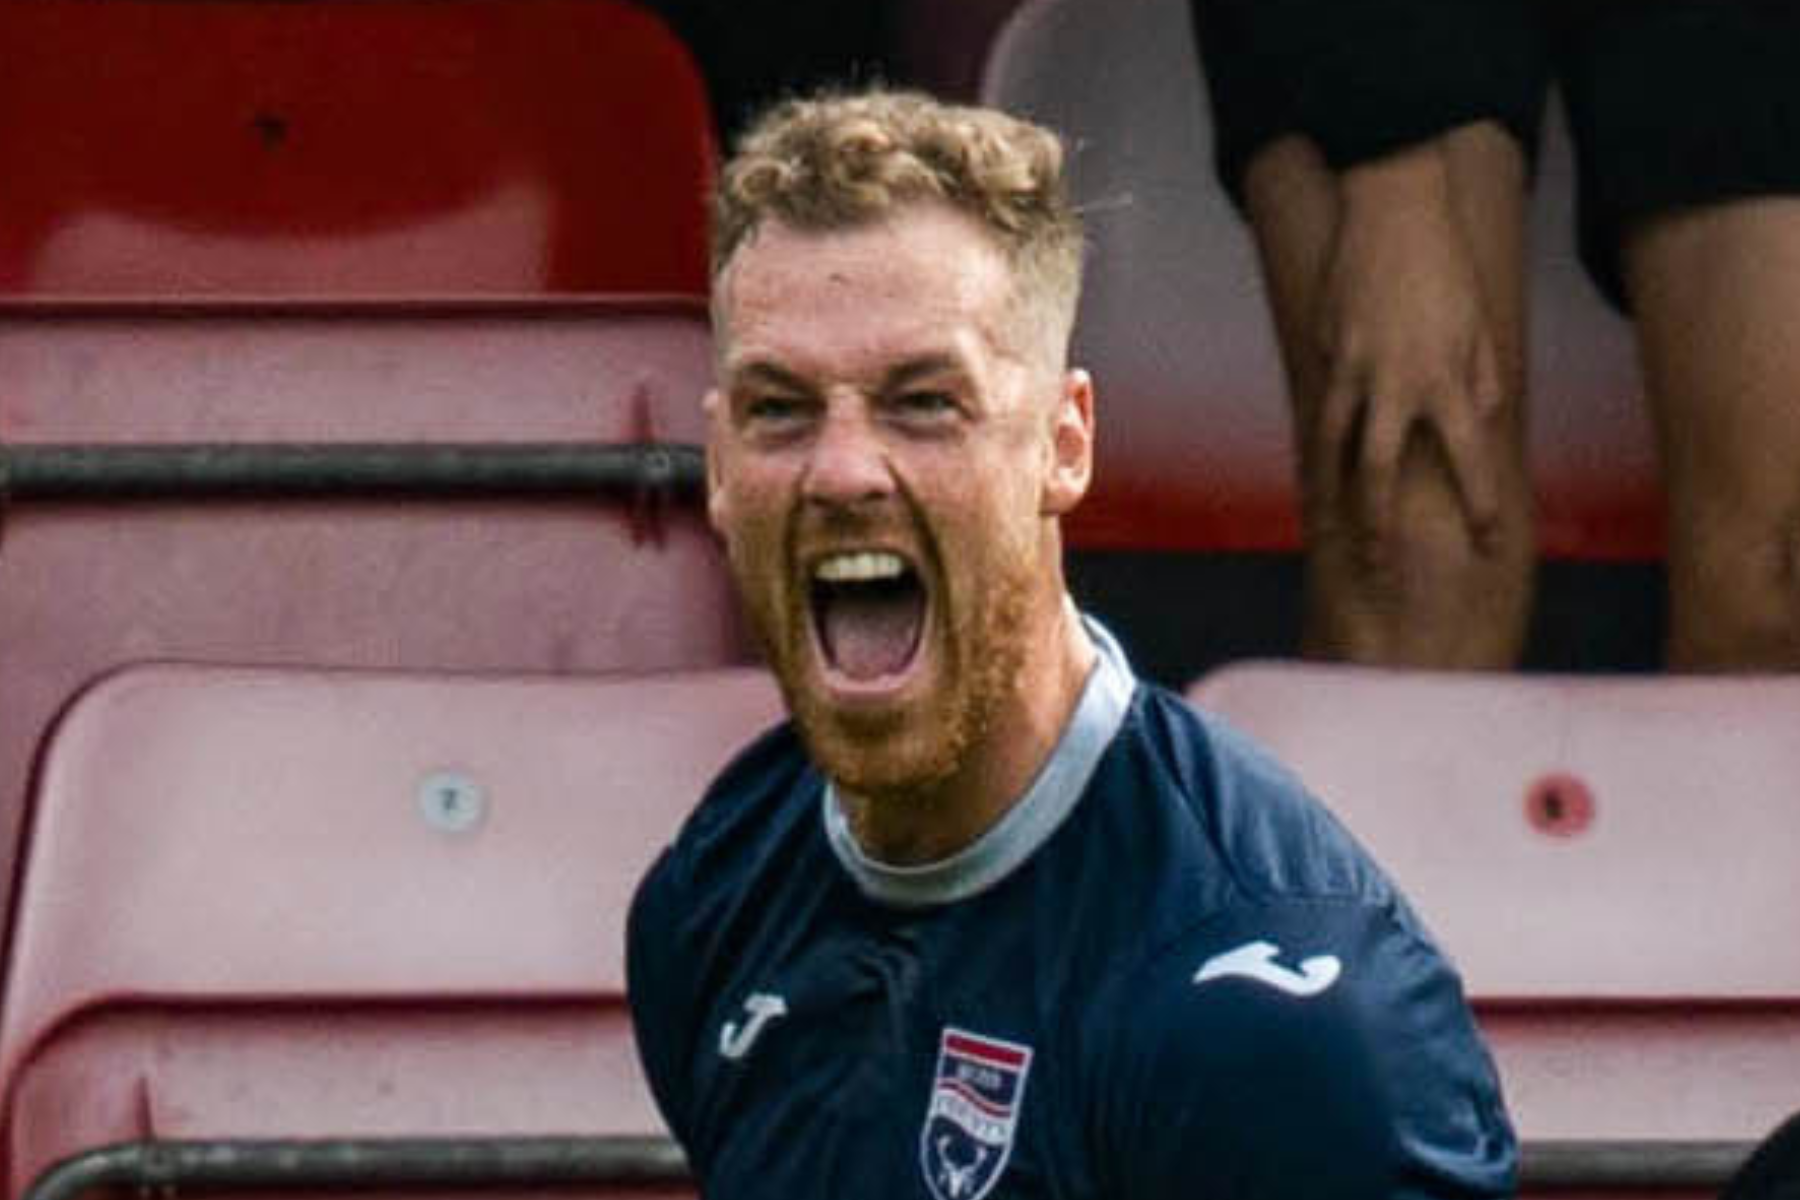 Ross County 2 Hibs 1: White fires hosts out of relegation zone